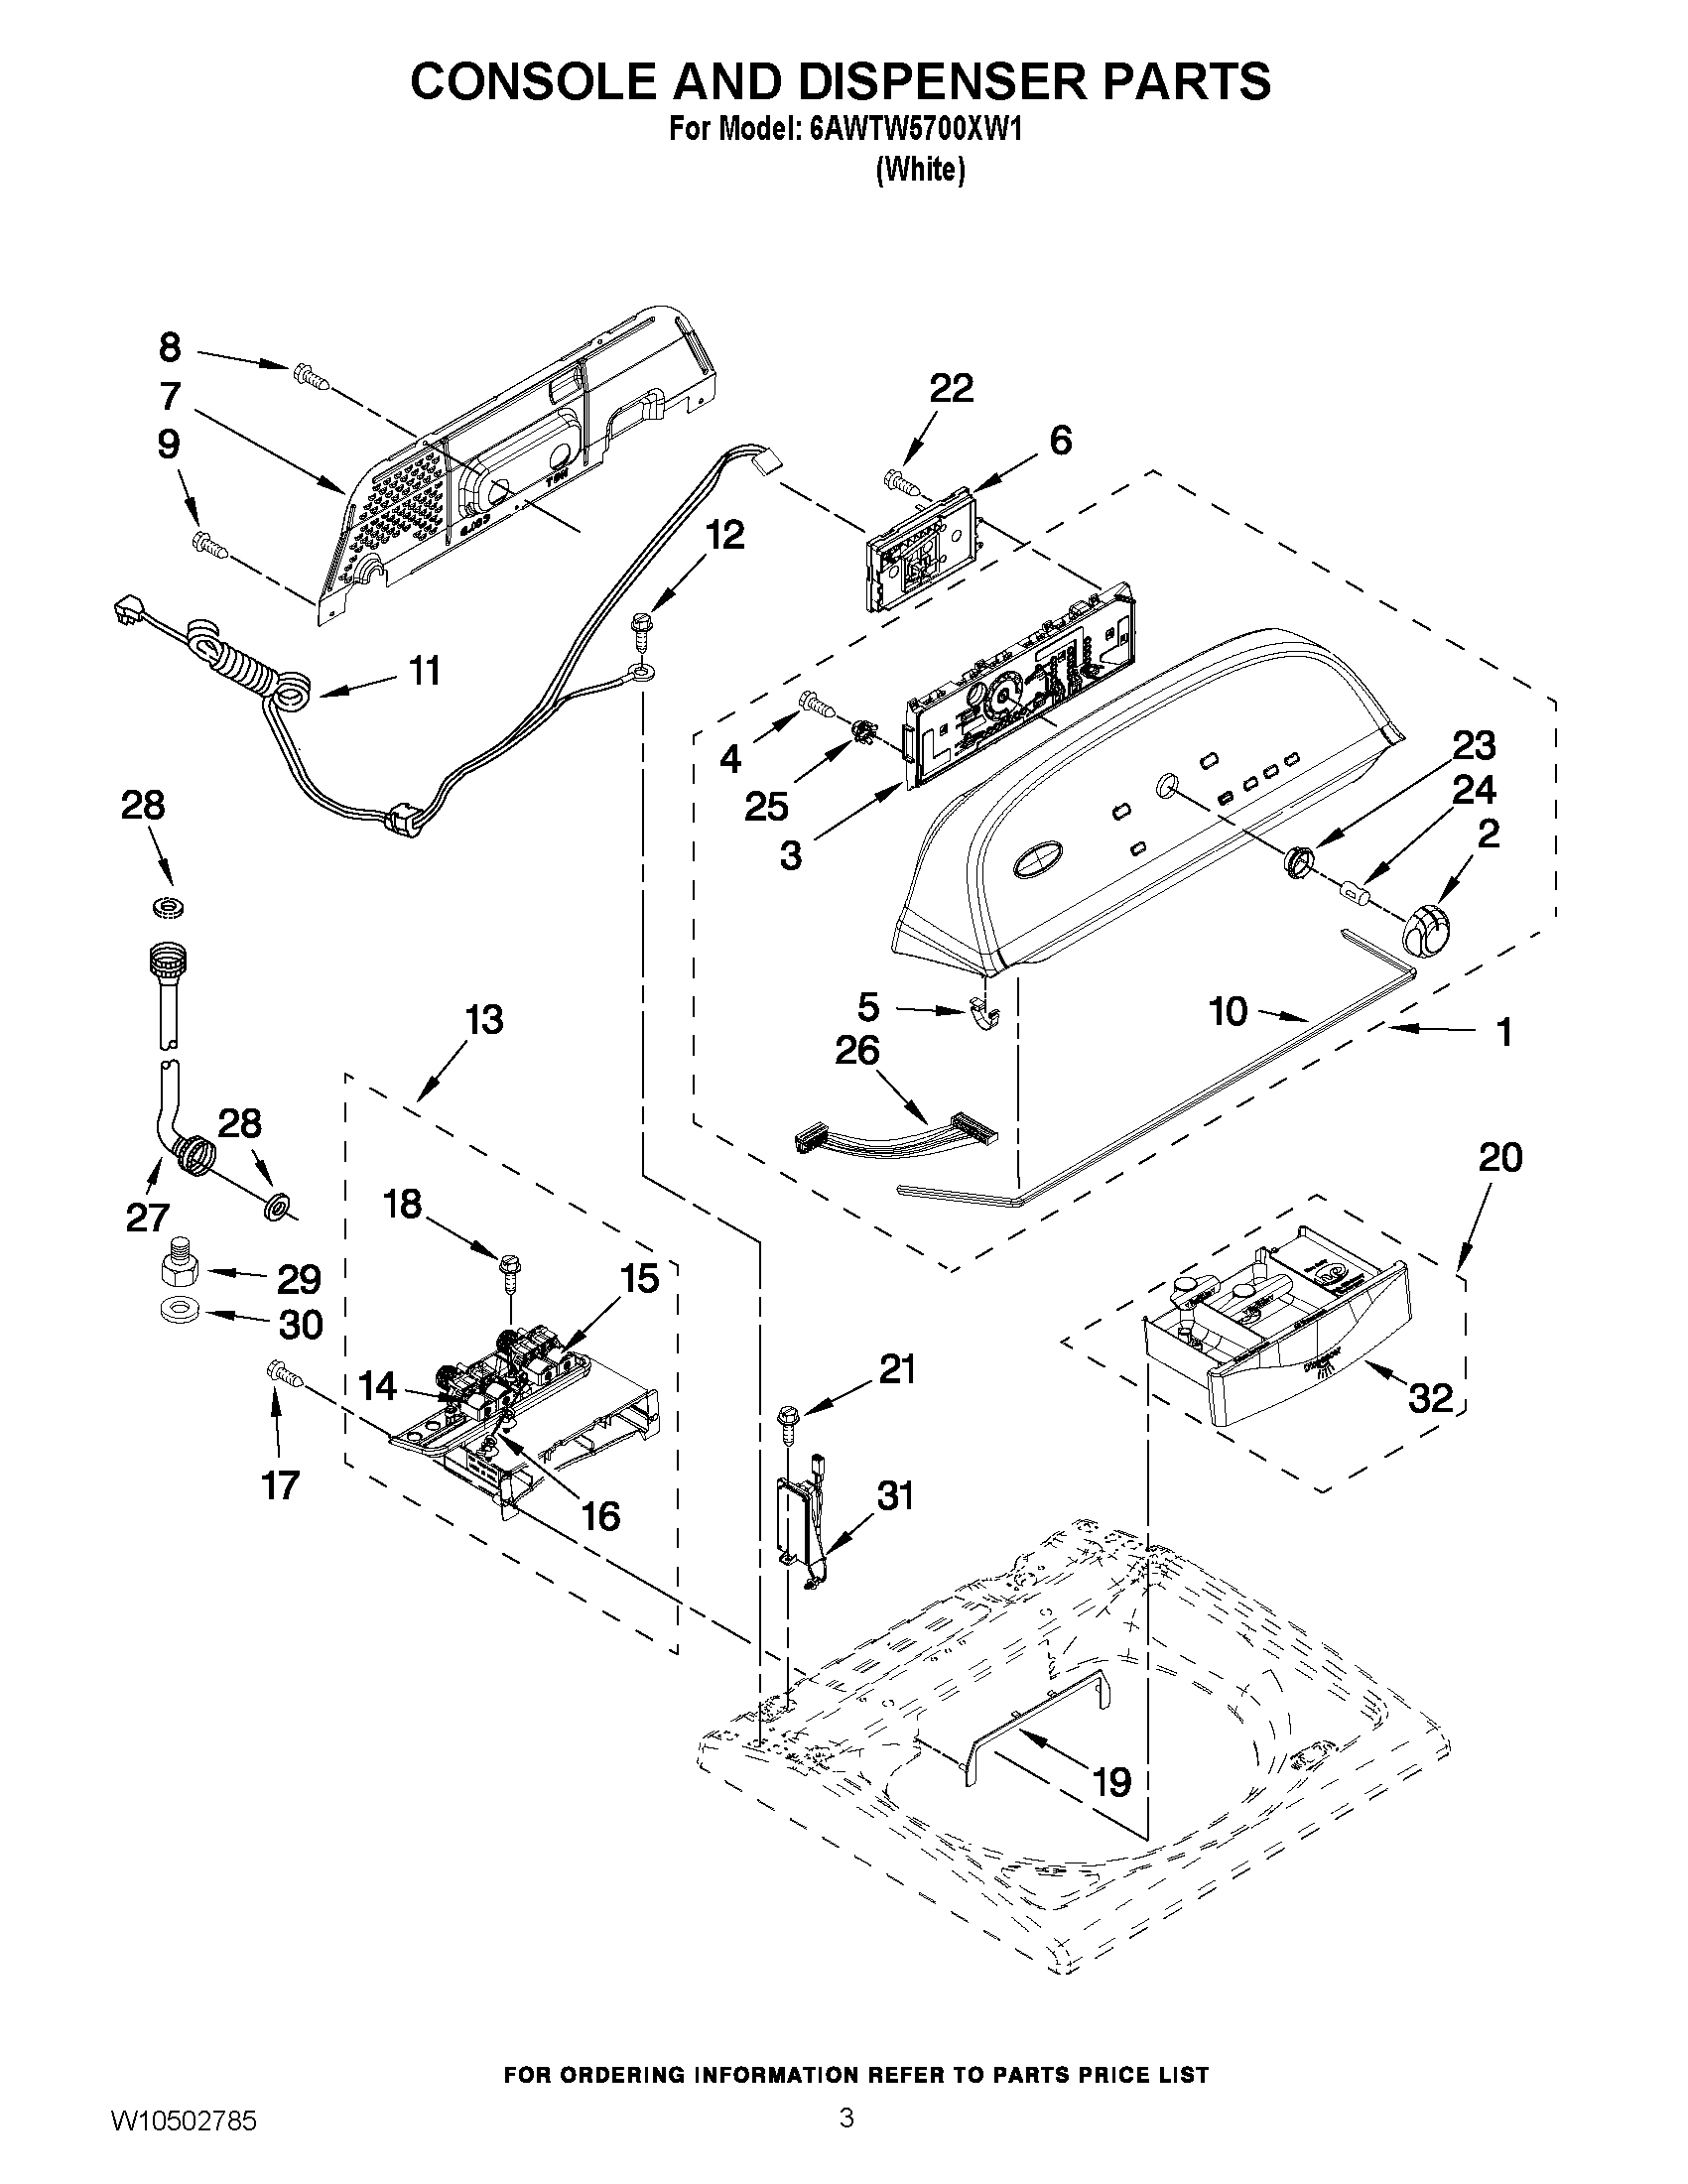 02 - CONSOLE AND DISPENSER PARTS